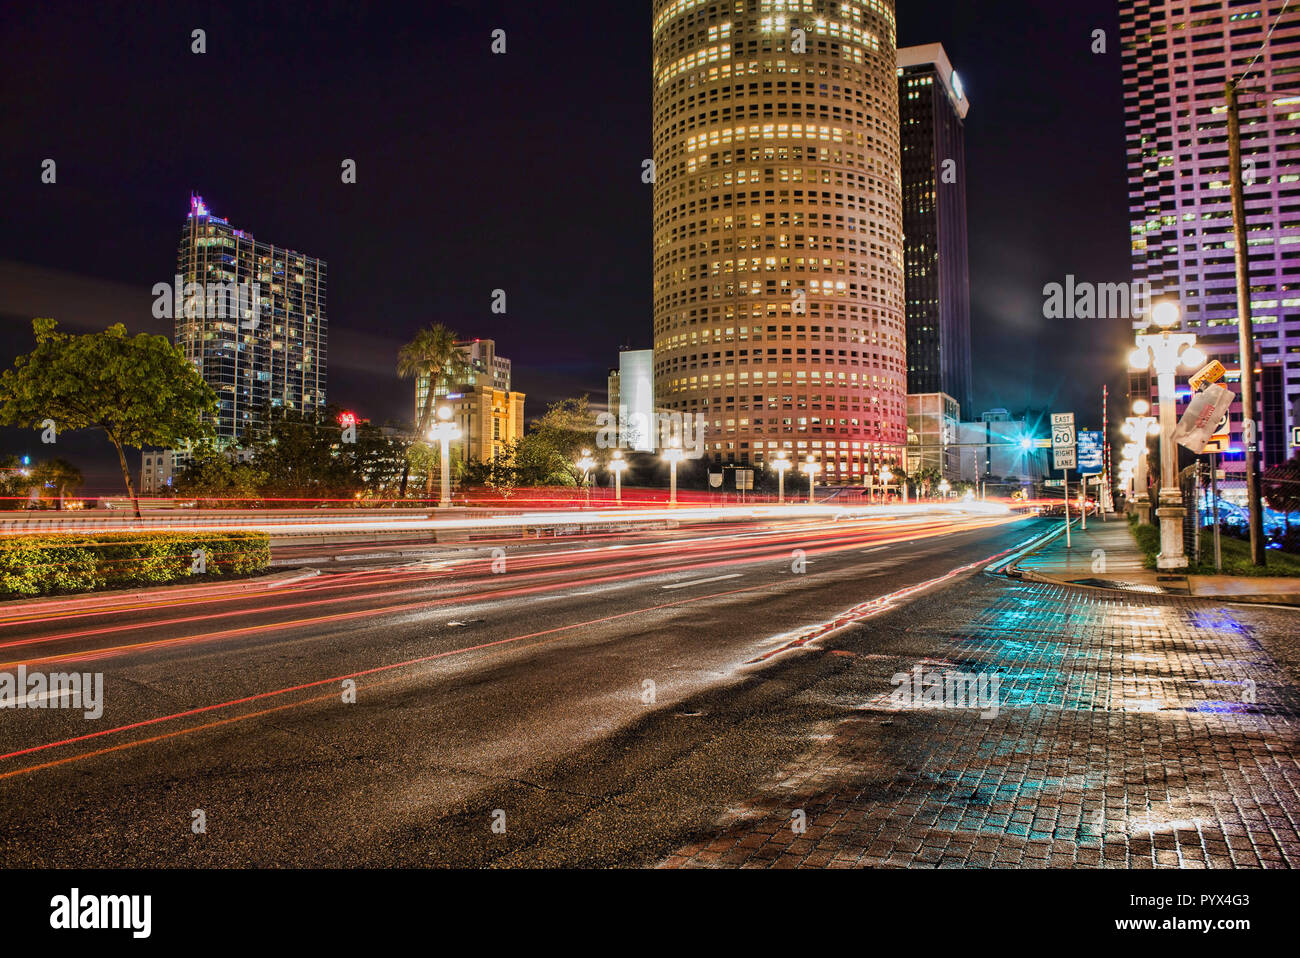 The rush of car lights go by on this rainy night in the city. Stock Photo